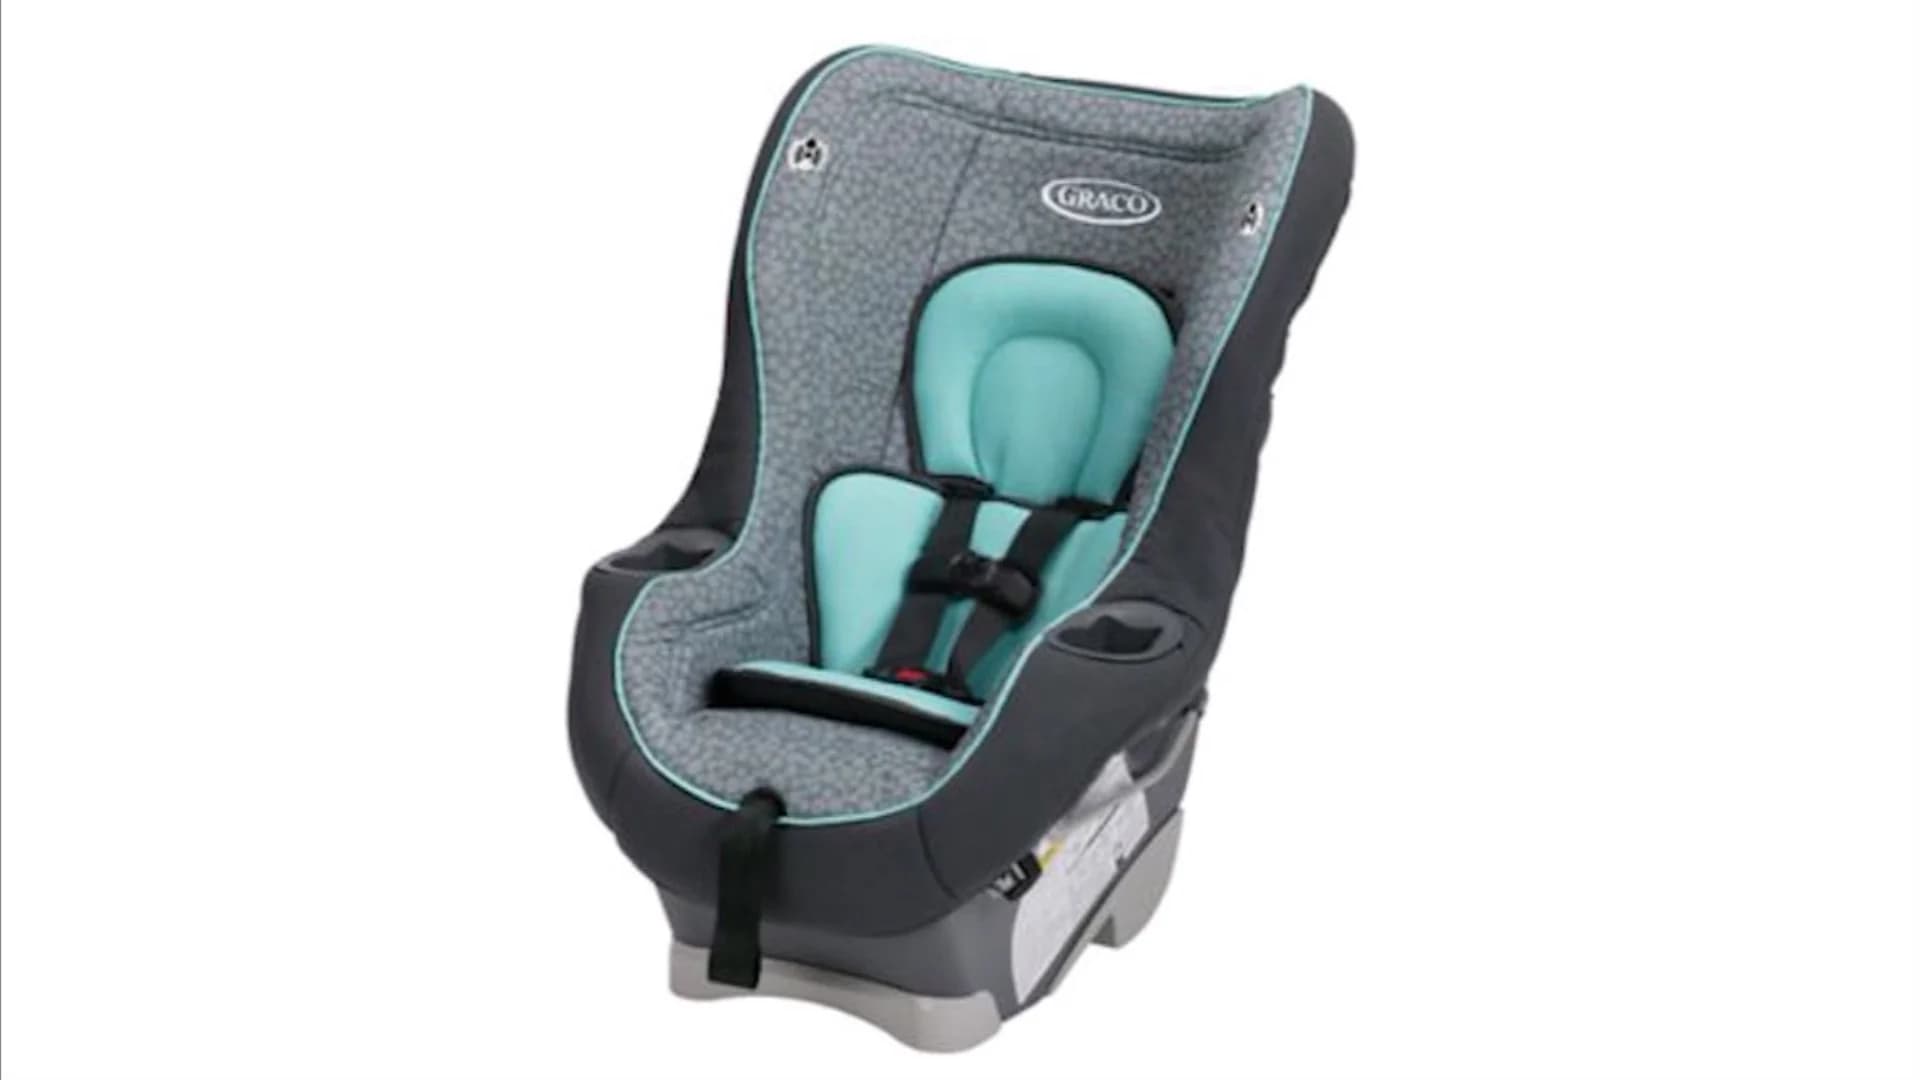 Graco Children's Products recalls more than 25,000 car seats due to harness webbing problem